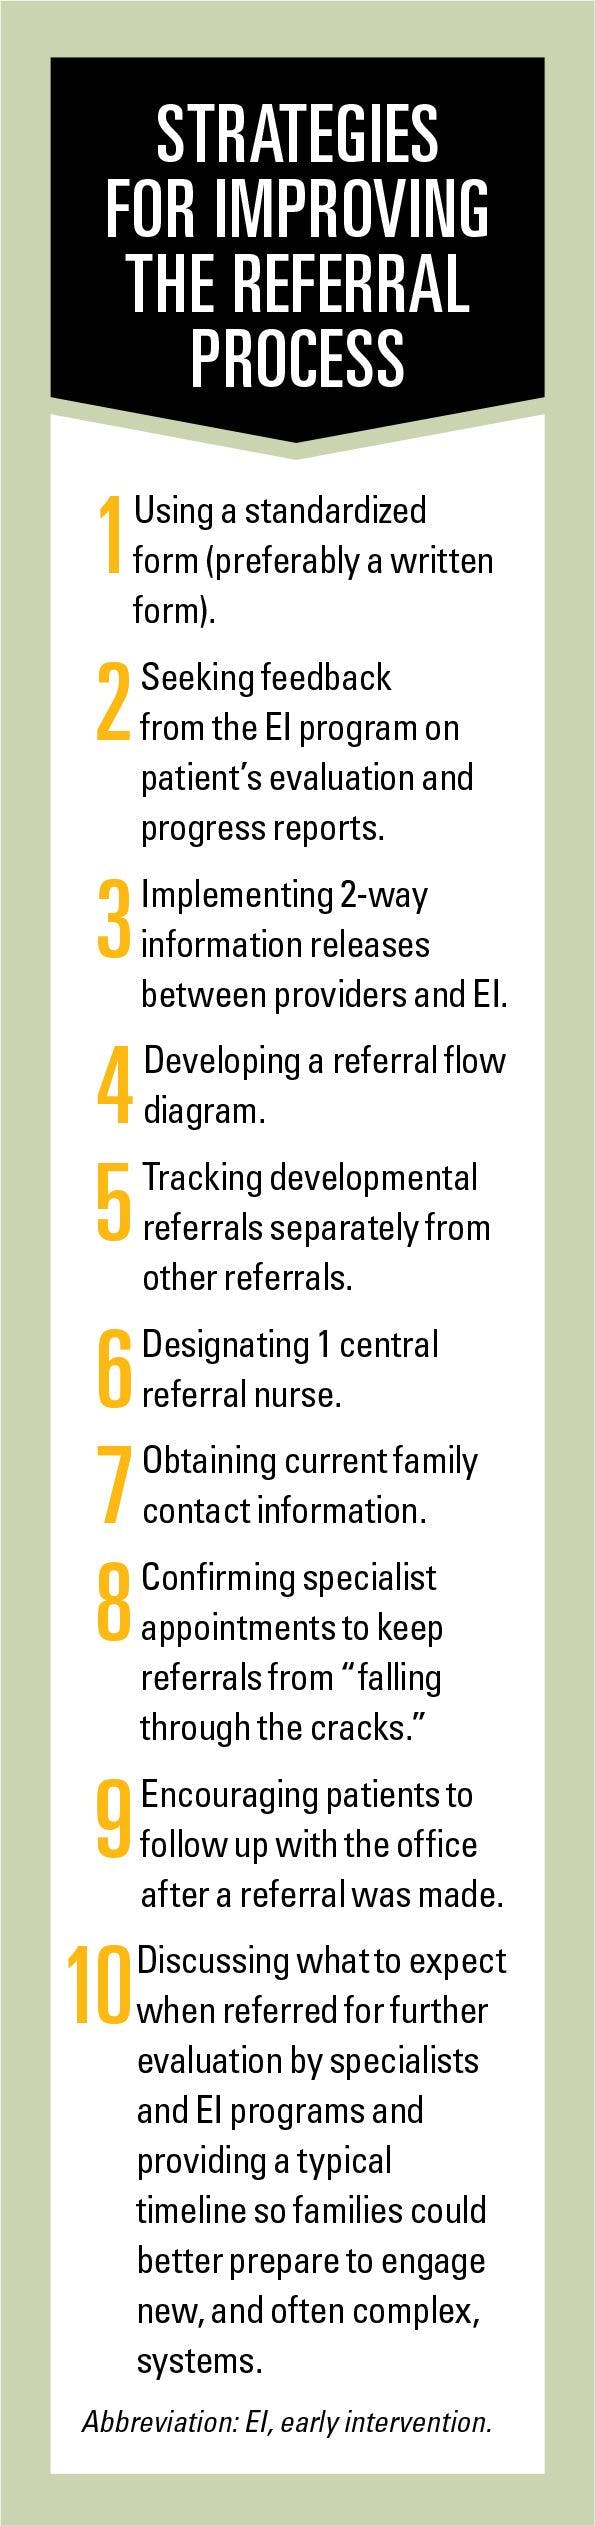 Strategies for improving the referral process